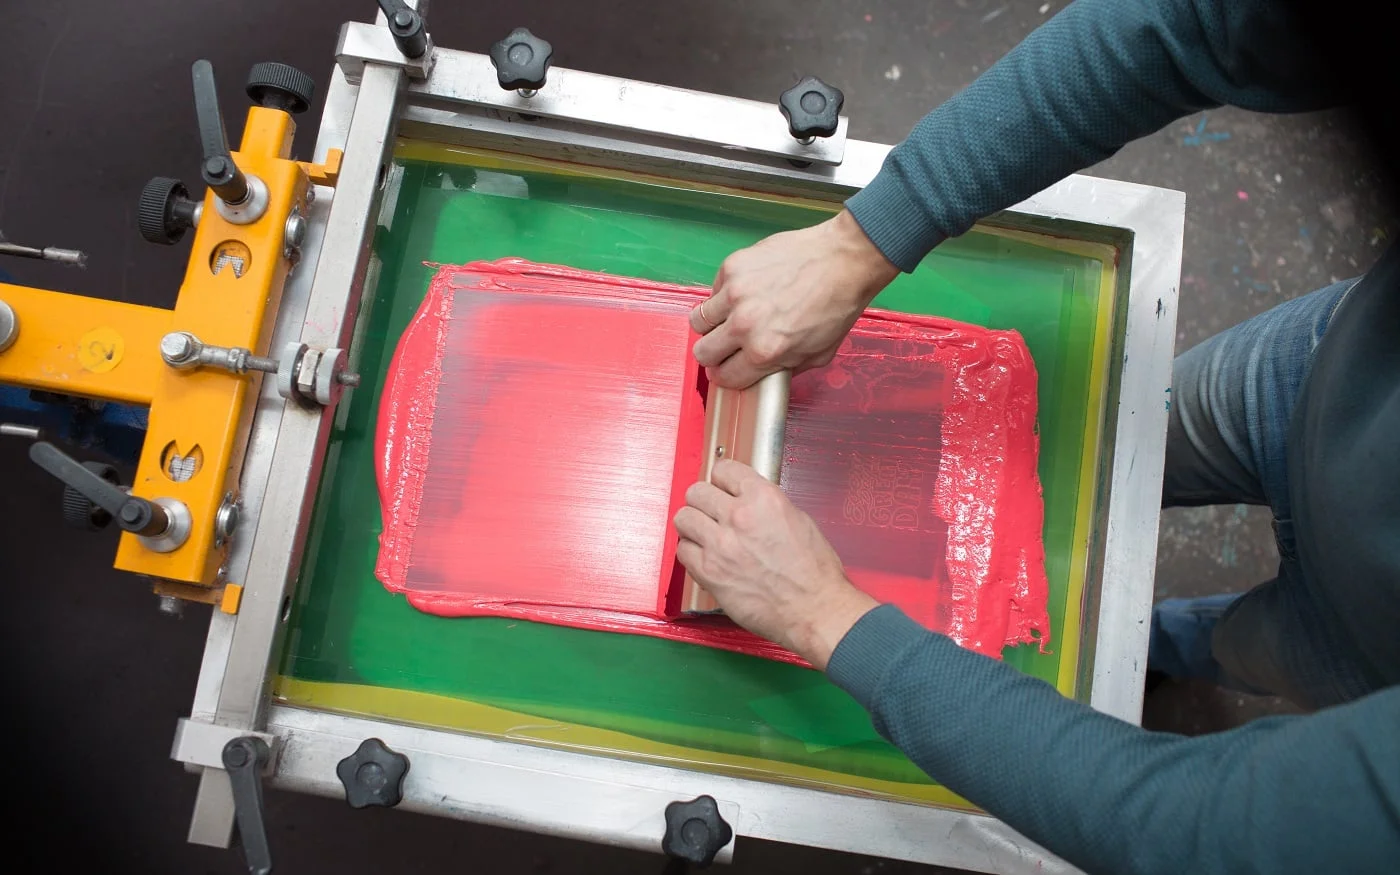 Silk screen printing. Serigraphy. Color paints and fabric. Plastisol paint and squeegee.